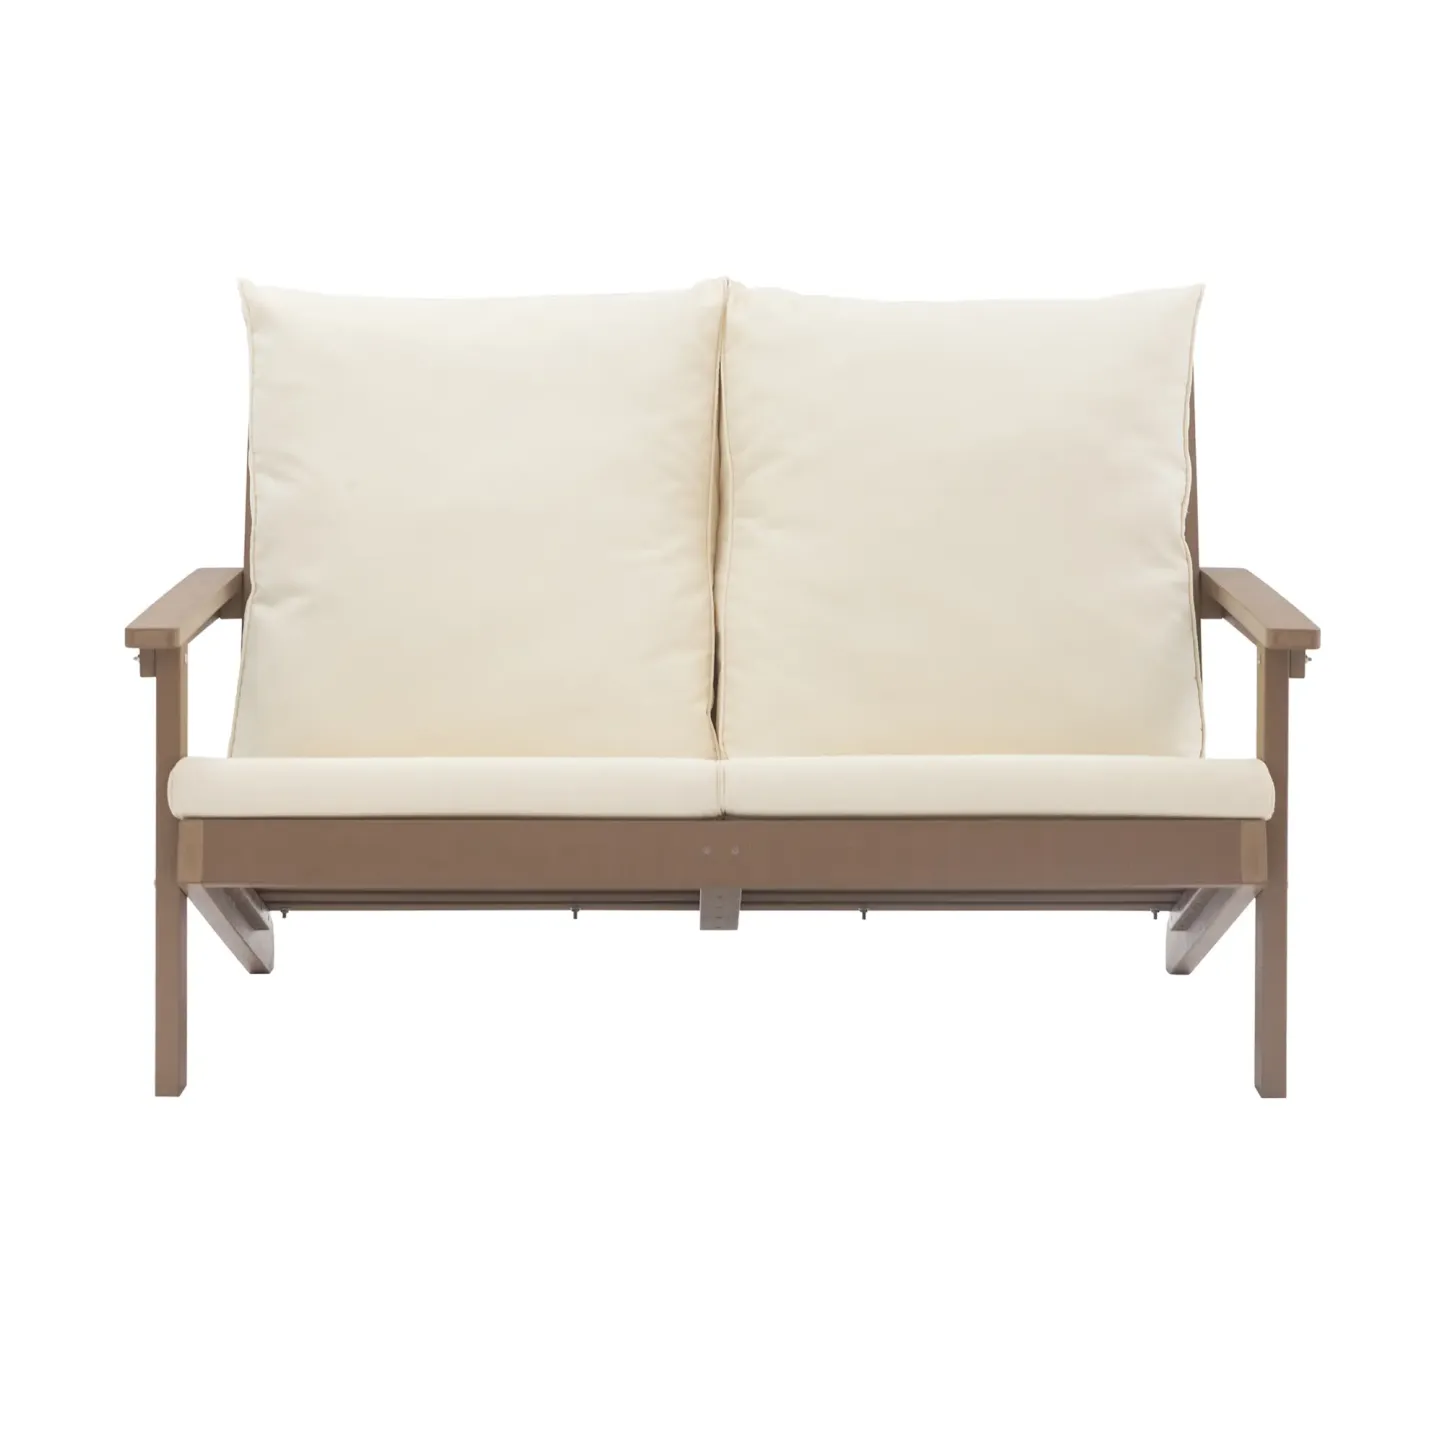 2-Seater Composite HIPS Frame Sofa with Gray Cushions